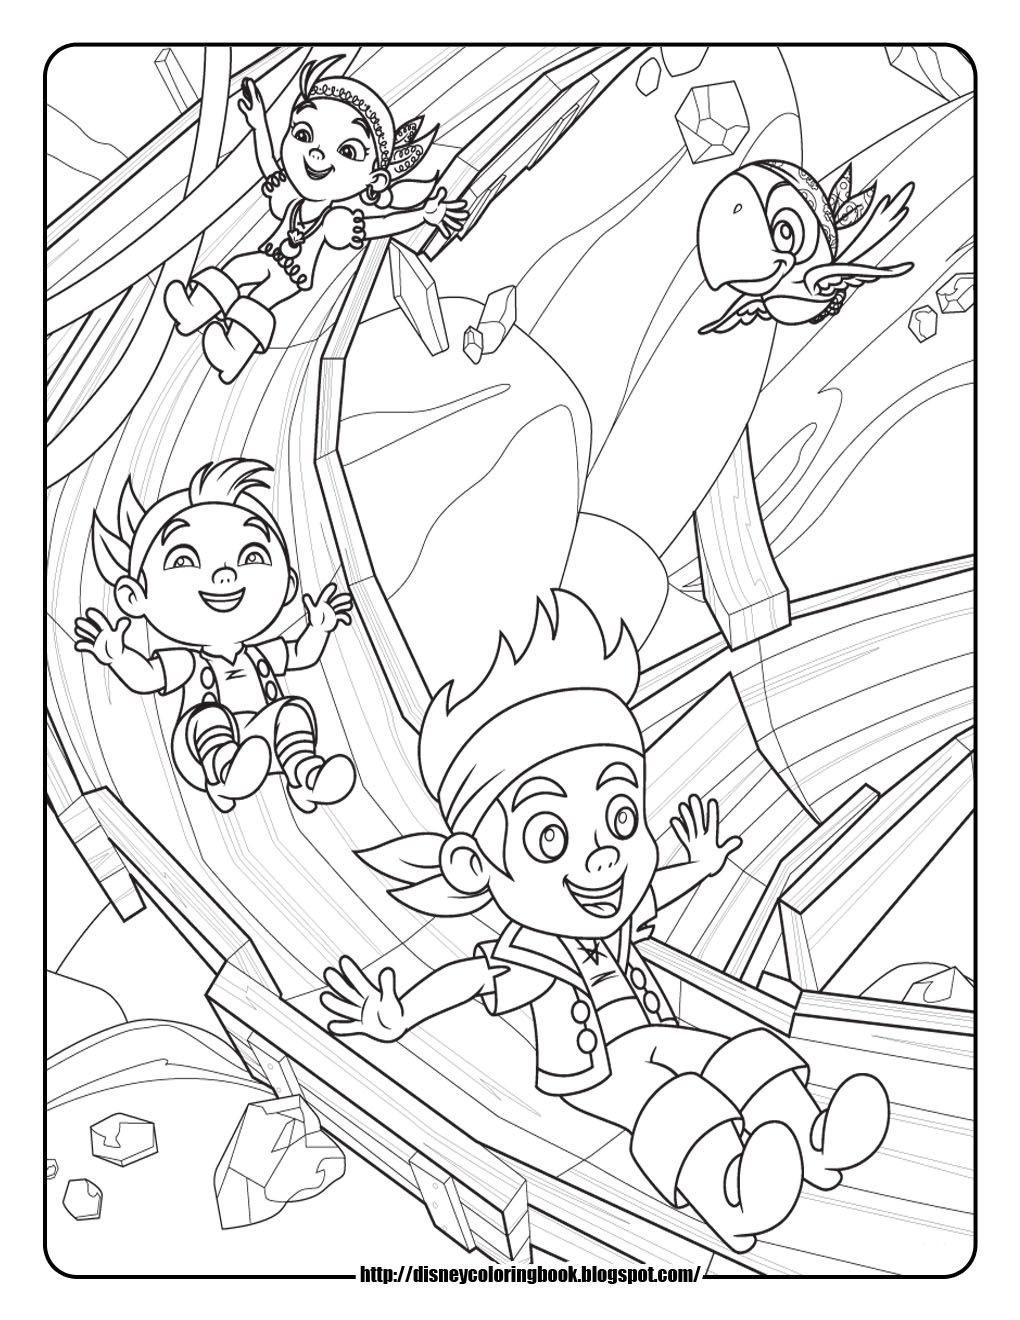 Jake and the Neverland Pirates 3 Free Disney Coloring Sheets